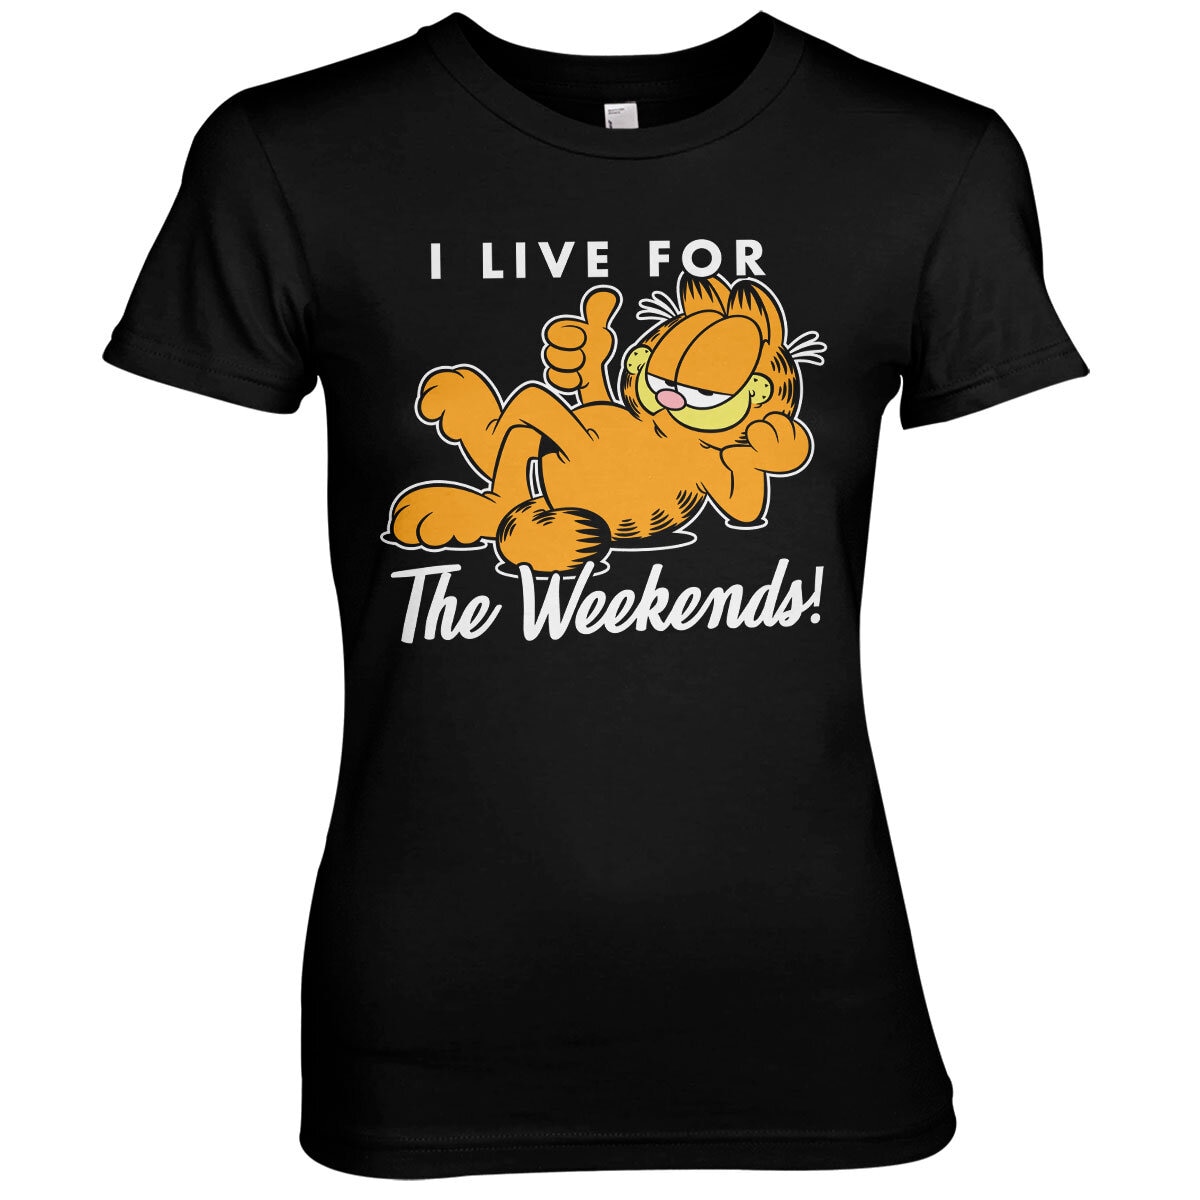 Garfield - Live For The Weekend Girly Tee